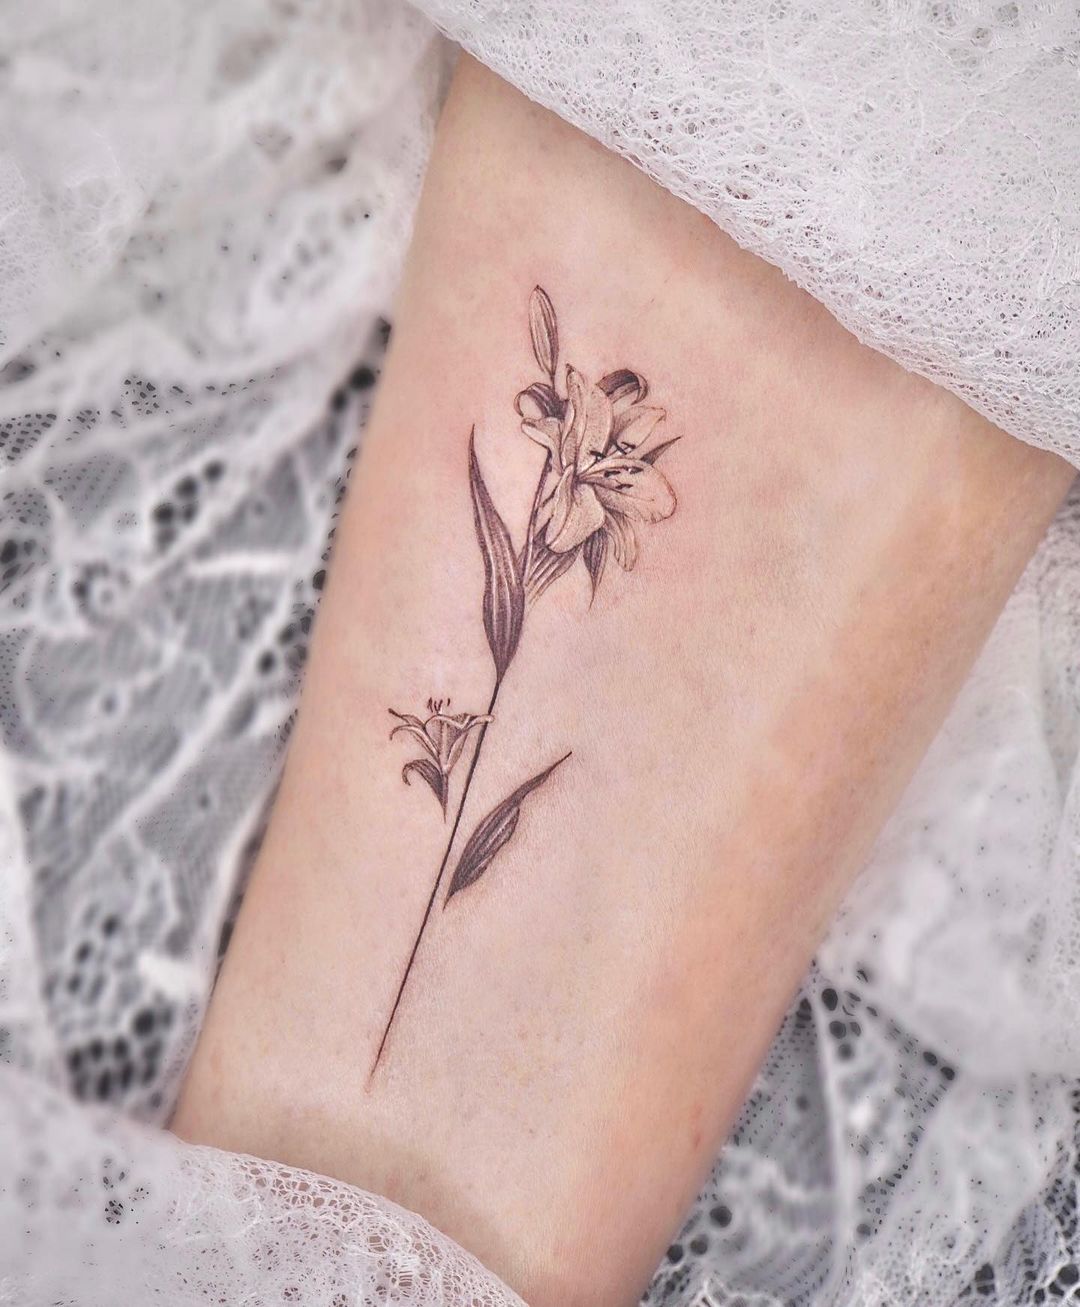 lily on forearm tattoo design by mariink.tattoos